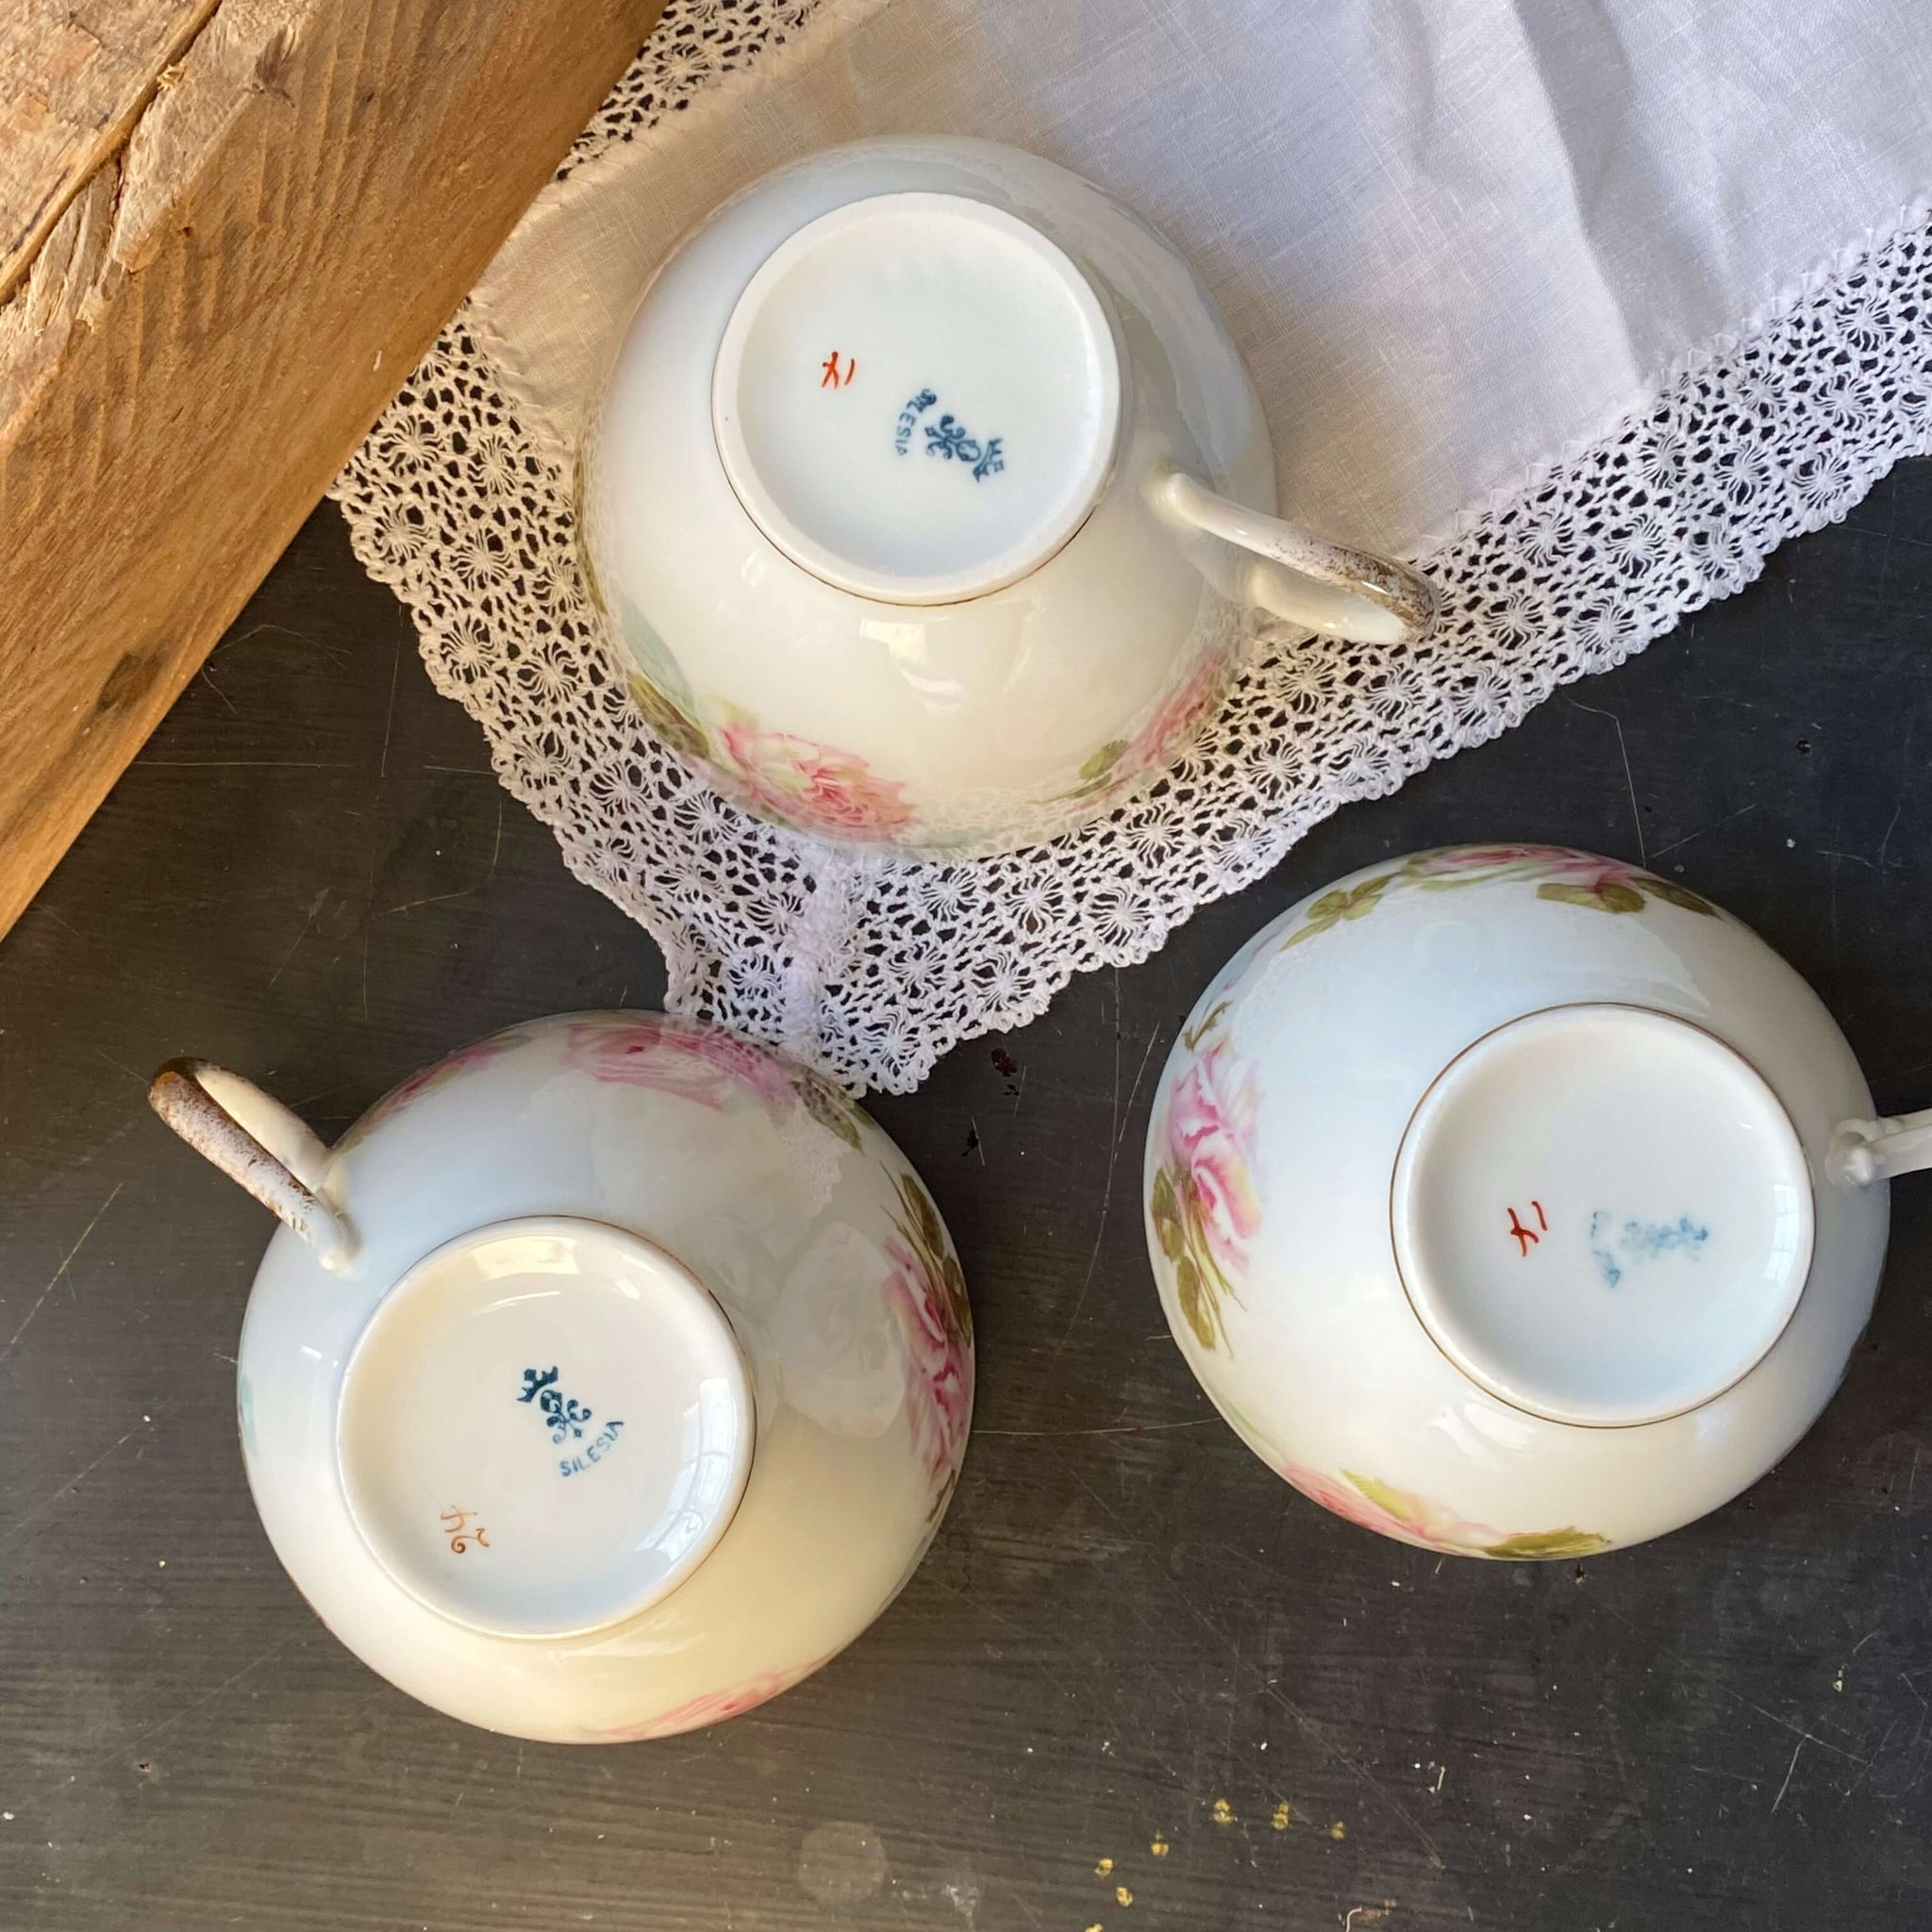 Antique Hermann Ohme Porcelain Teacups - Set of Three circa 1900-1920 Made in Germany